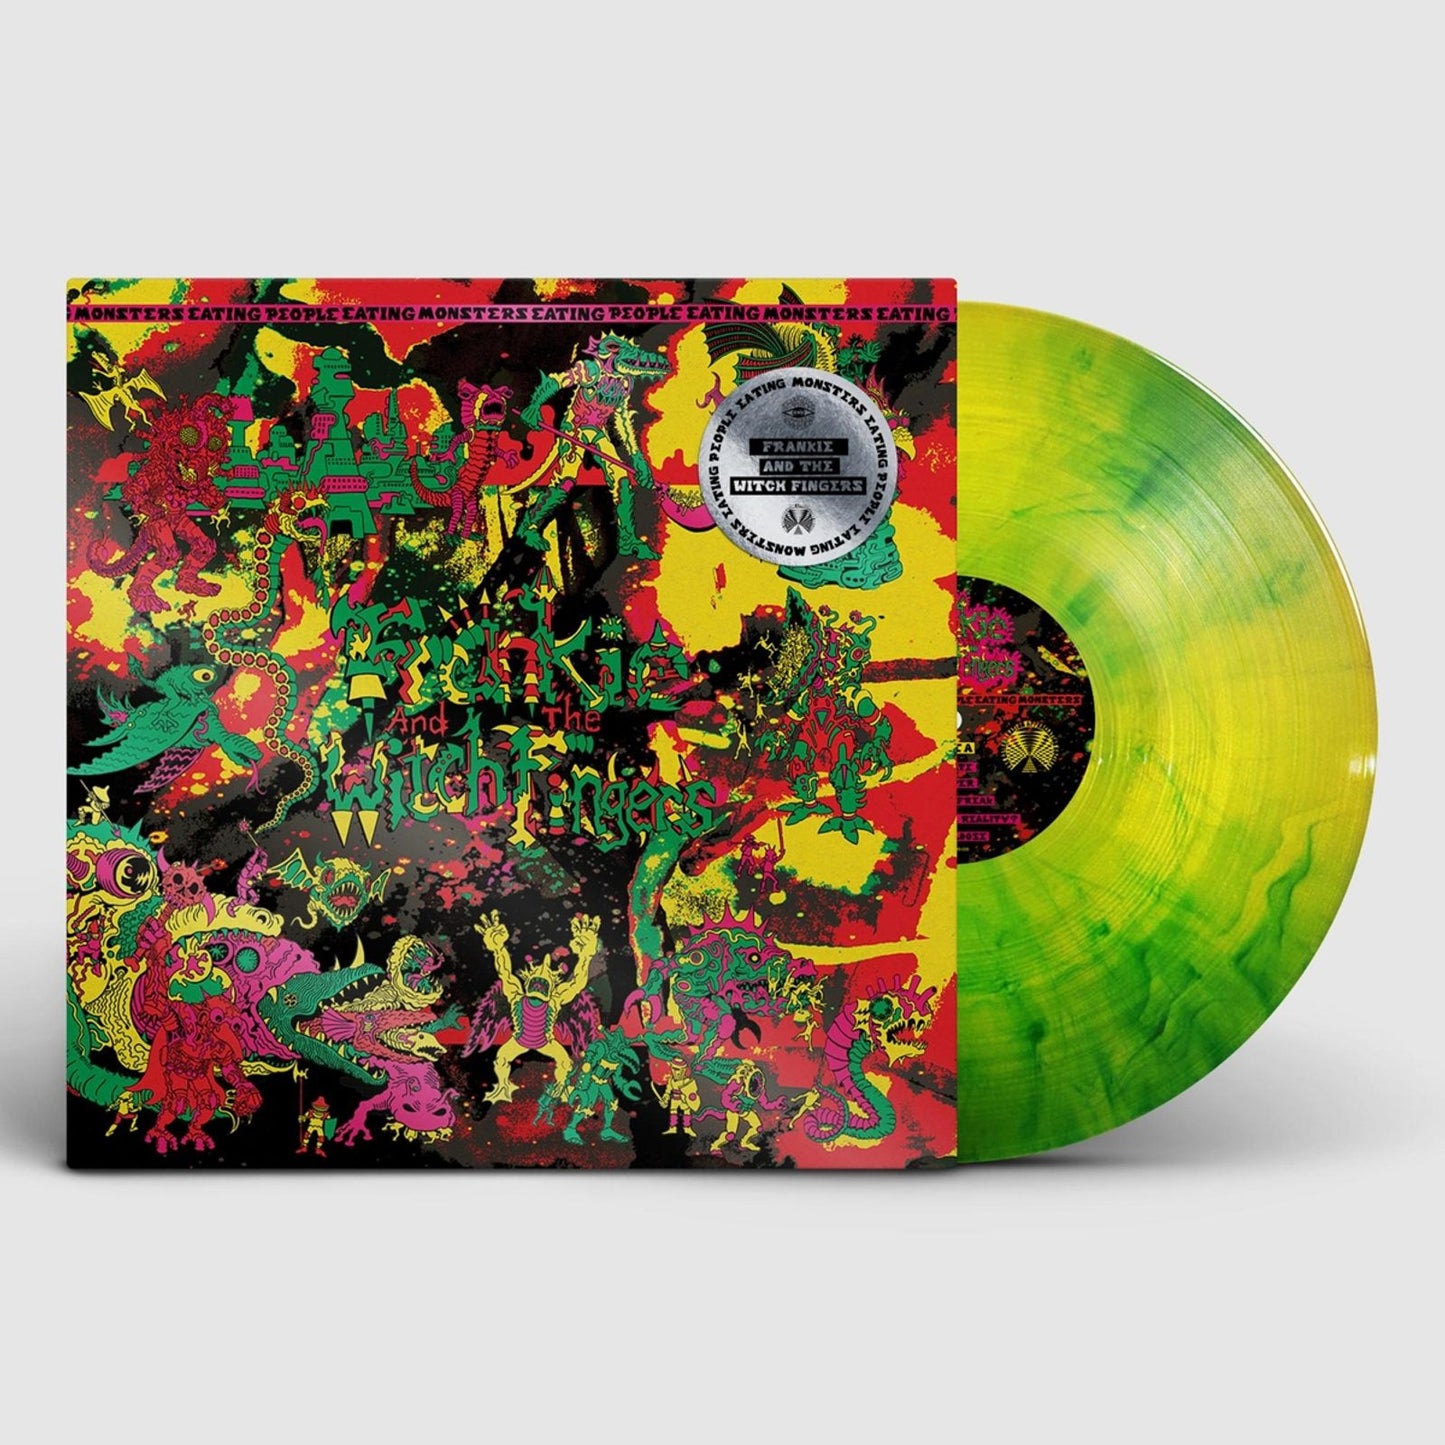 Frankie and the Witch Fingers - Monsters Eating People Eating Monsters... (Limited Edition on Green Vinyl)